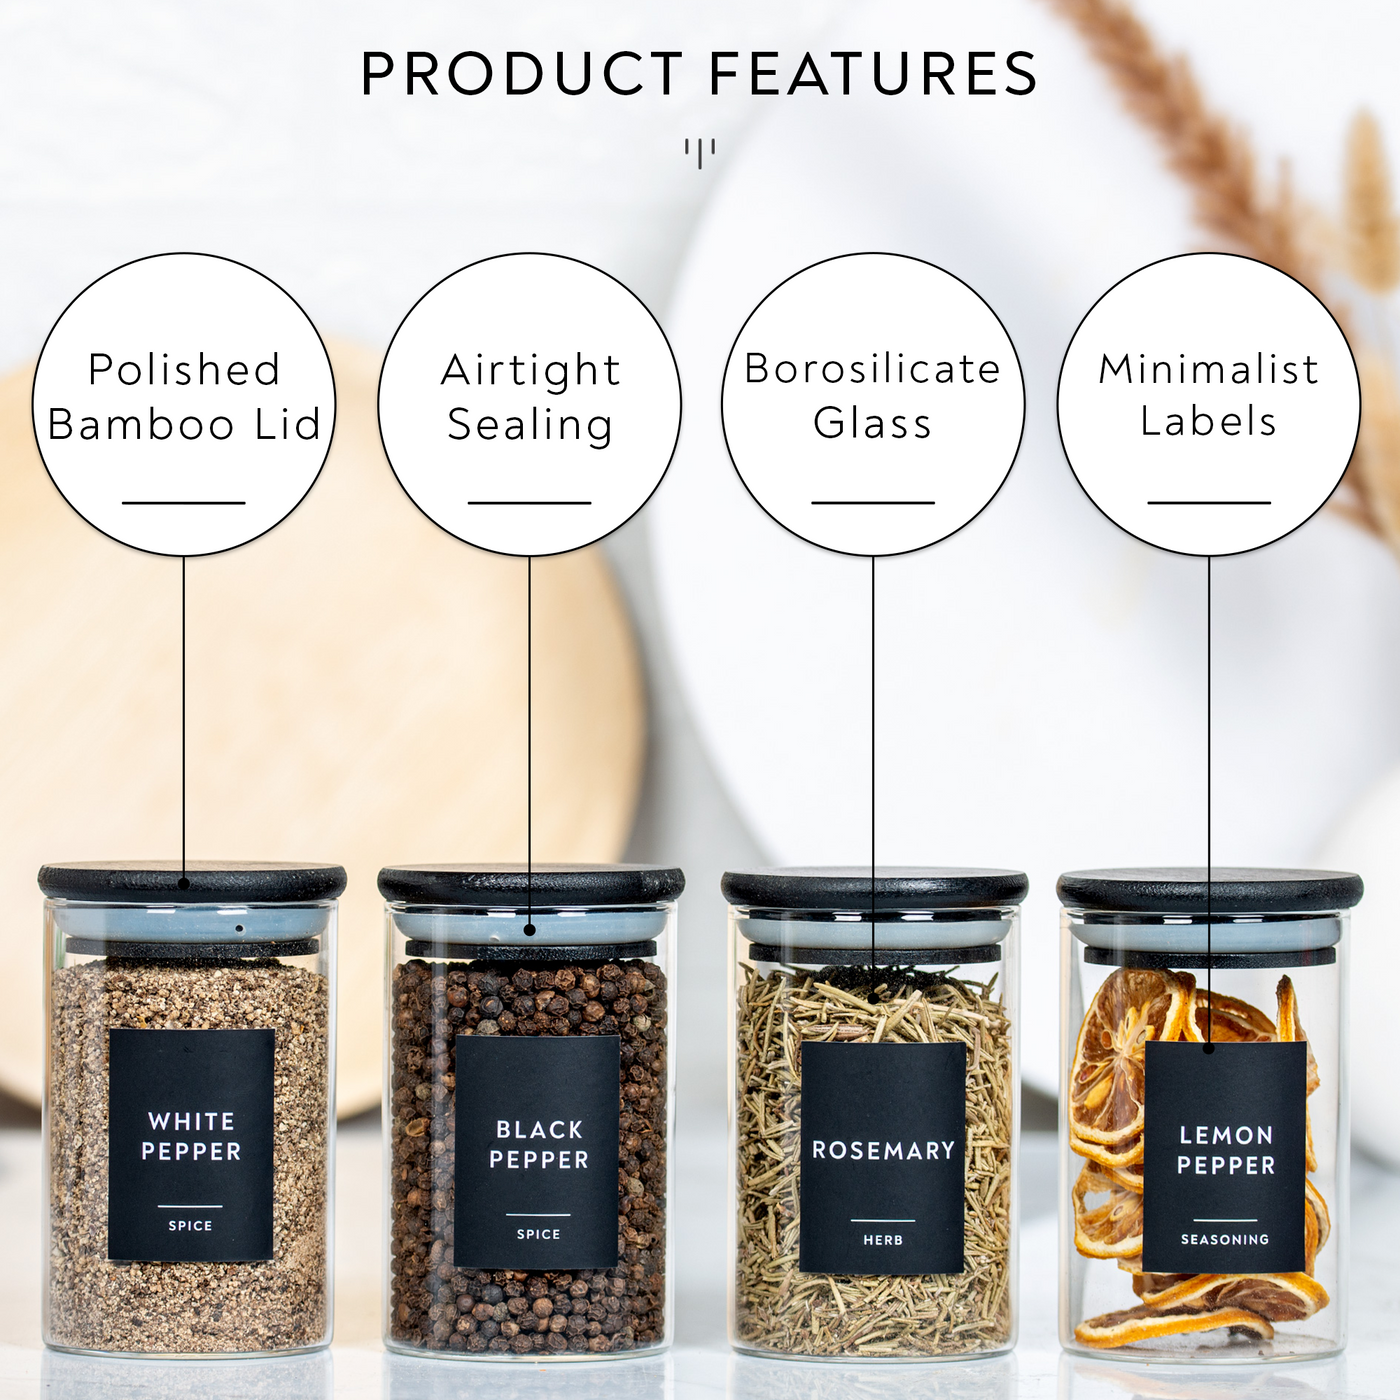 Buy Wholesale China High Quality 12 Natural Bamboo Spice Jars 8.5 Oz - Large  Glass Jars With Bamboo Lids - Seasoning Jars With Airtight Lids & Seasoning  Containers Spice Jars With Bamboo